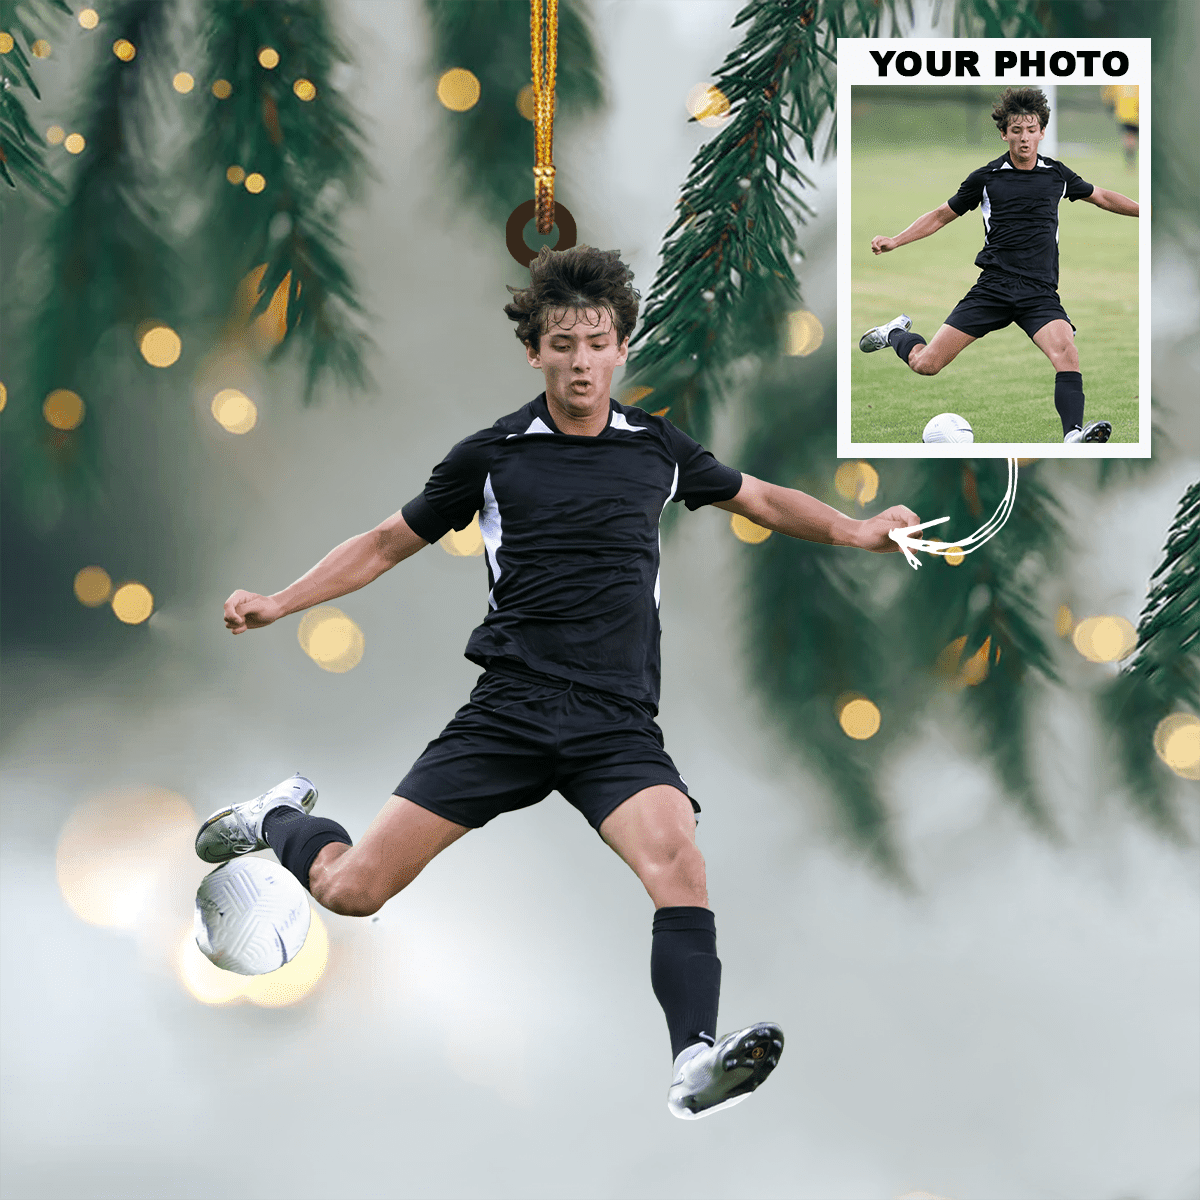 Custom Photo Soccer acrylic Ornament/ Personalized Gift For soccer lover/ Christmas Home Decor